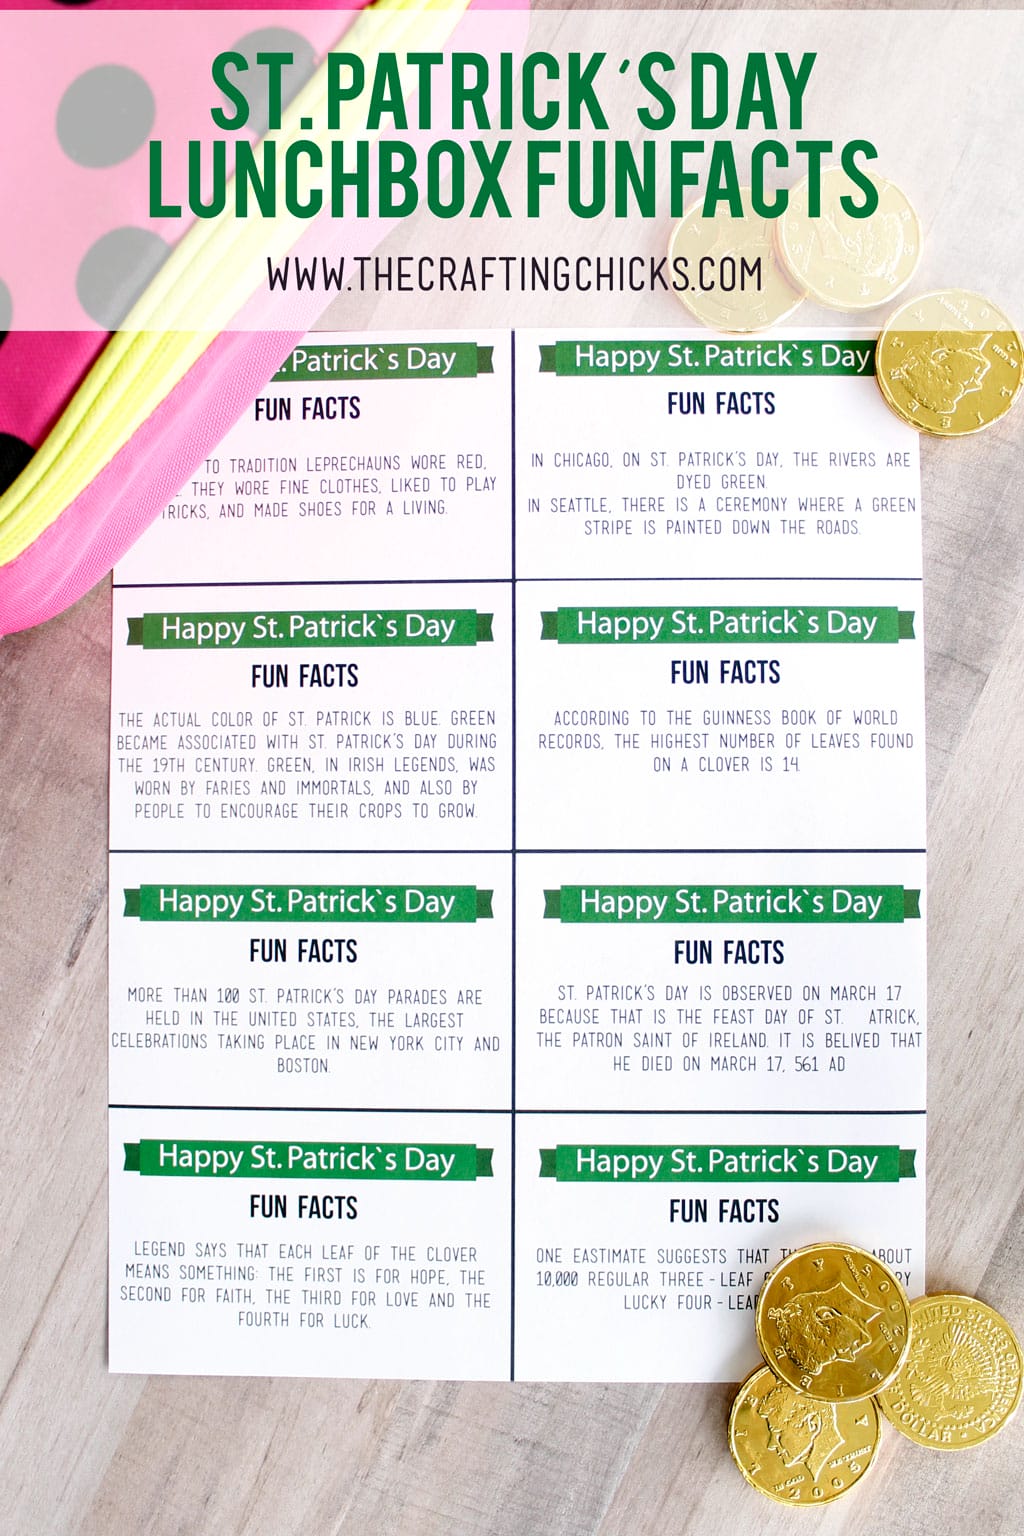 Make lunchtime learning time by adding these fun St. Patrick’s Day Lunchbox Fun Facts. Your kids will love reading and learning about this fun holiday and why they are wearing green.